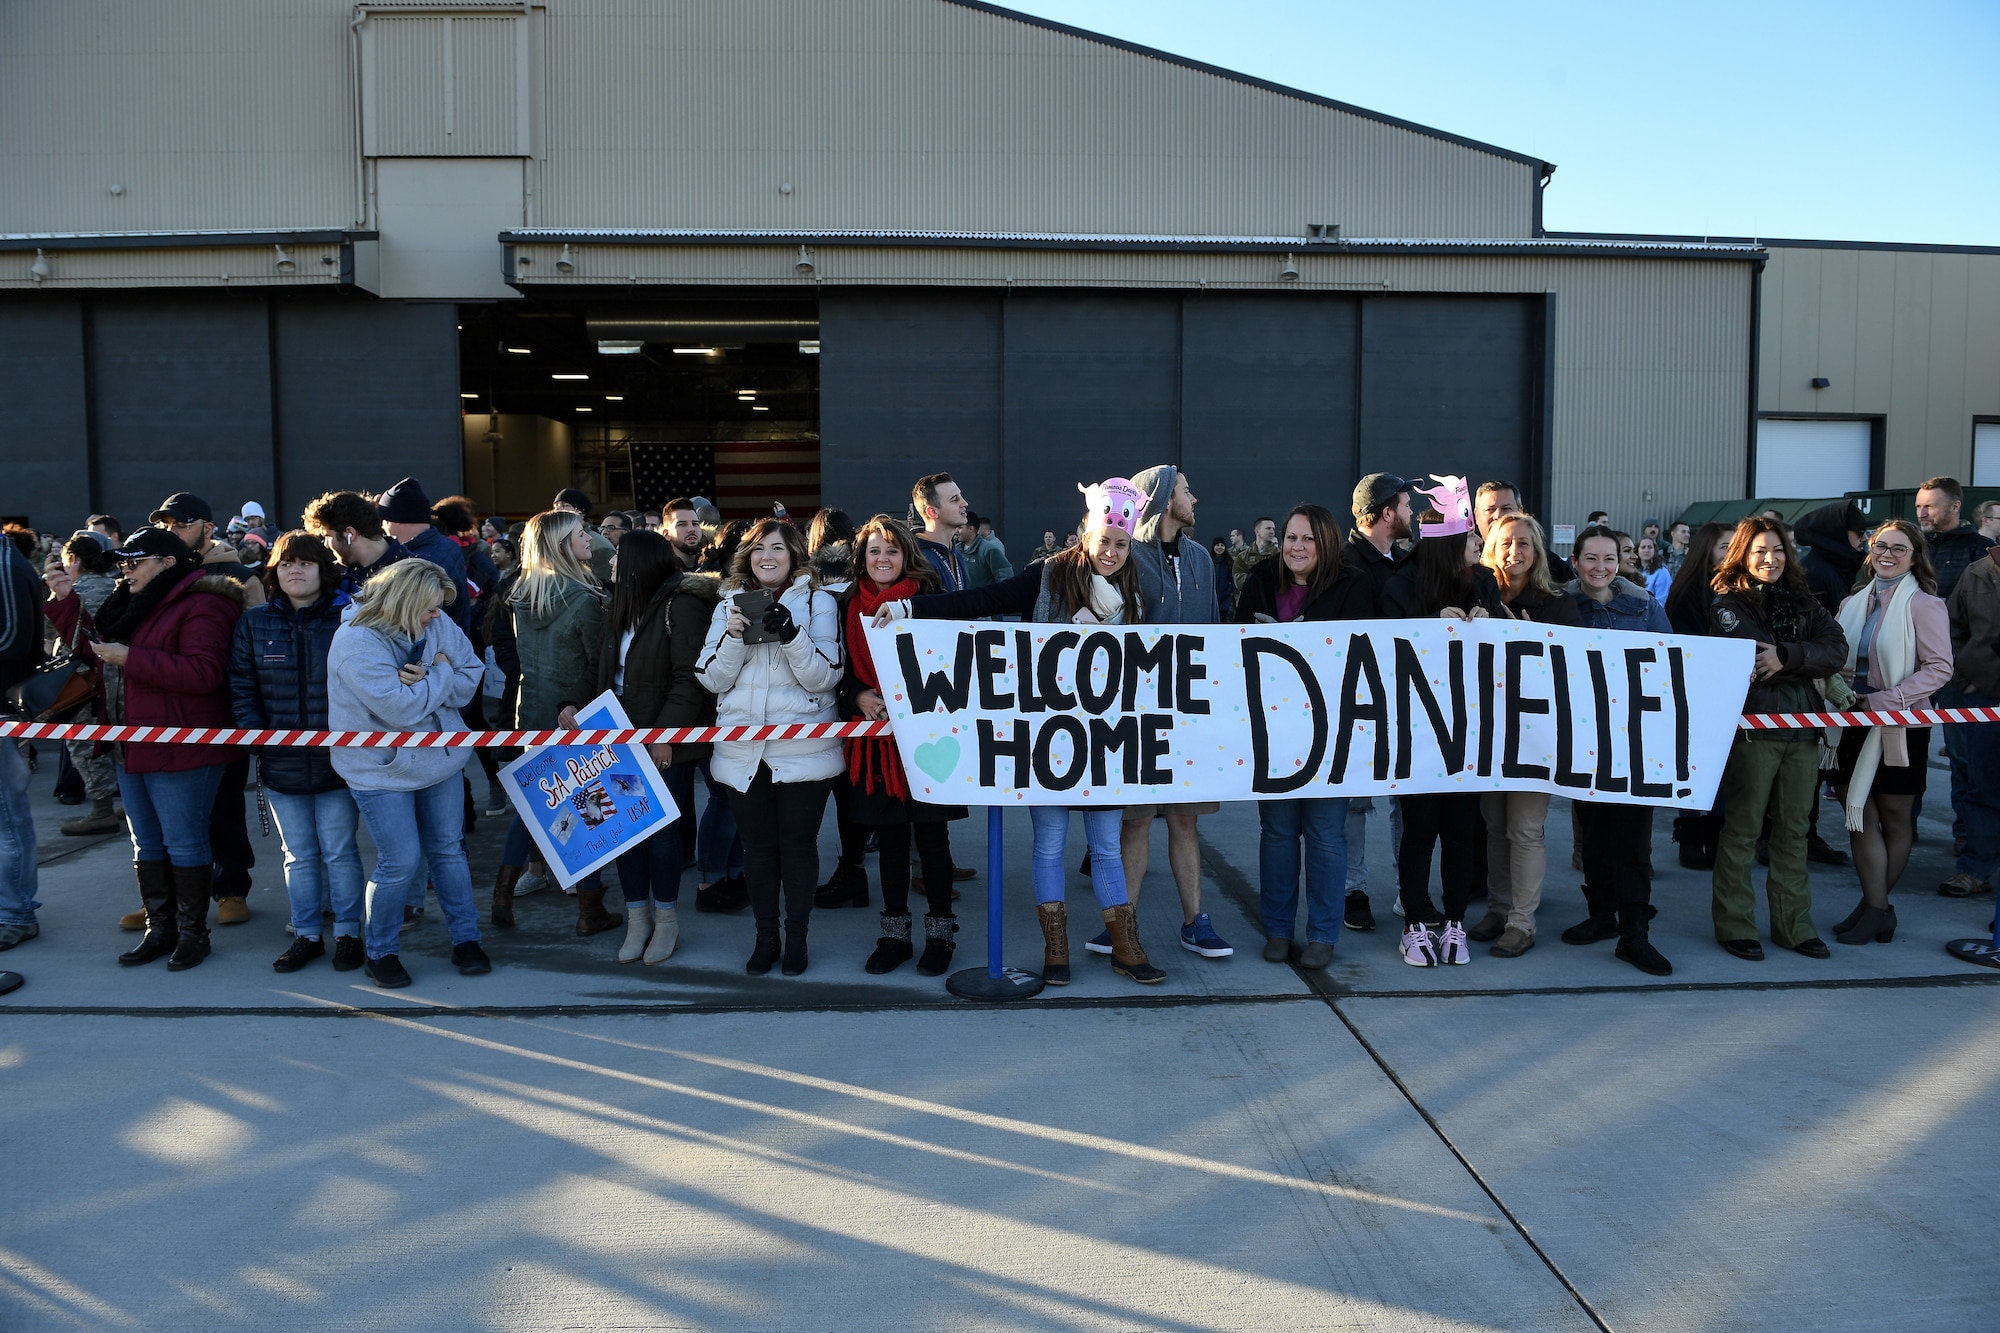 Airmen from the active duty 388th and Reserve 419th Fighter Wings return home on Nov. 1, 2019, following a six-month deployment to Al-Dhafra Air Base, United Arab Emirates. The 4th Fighter Squadron's deployment was the first F-35A Lightning II combat deployment. The Airmen supported the United States Air Force Central Command Mission in Region. (U.S. Air Force photo by R. Nial Bradshaw)